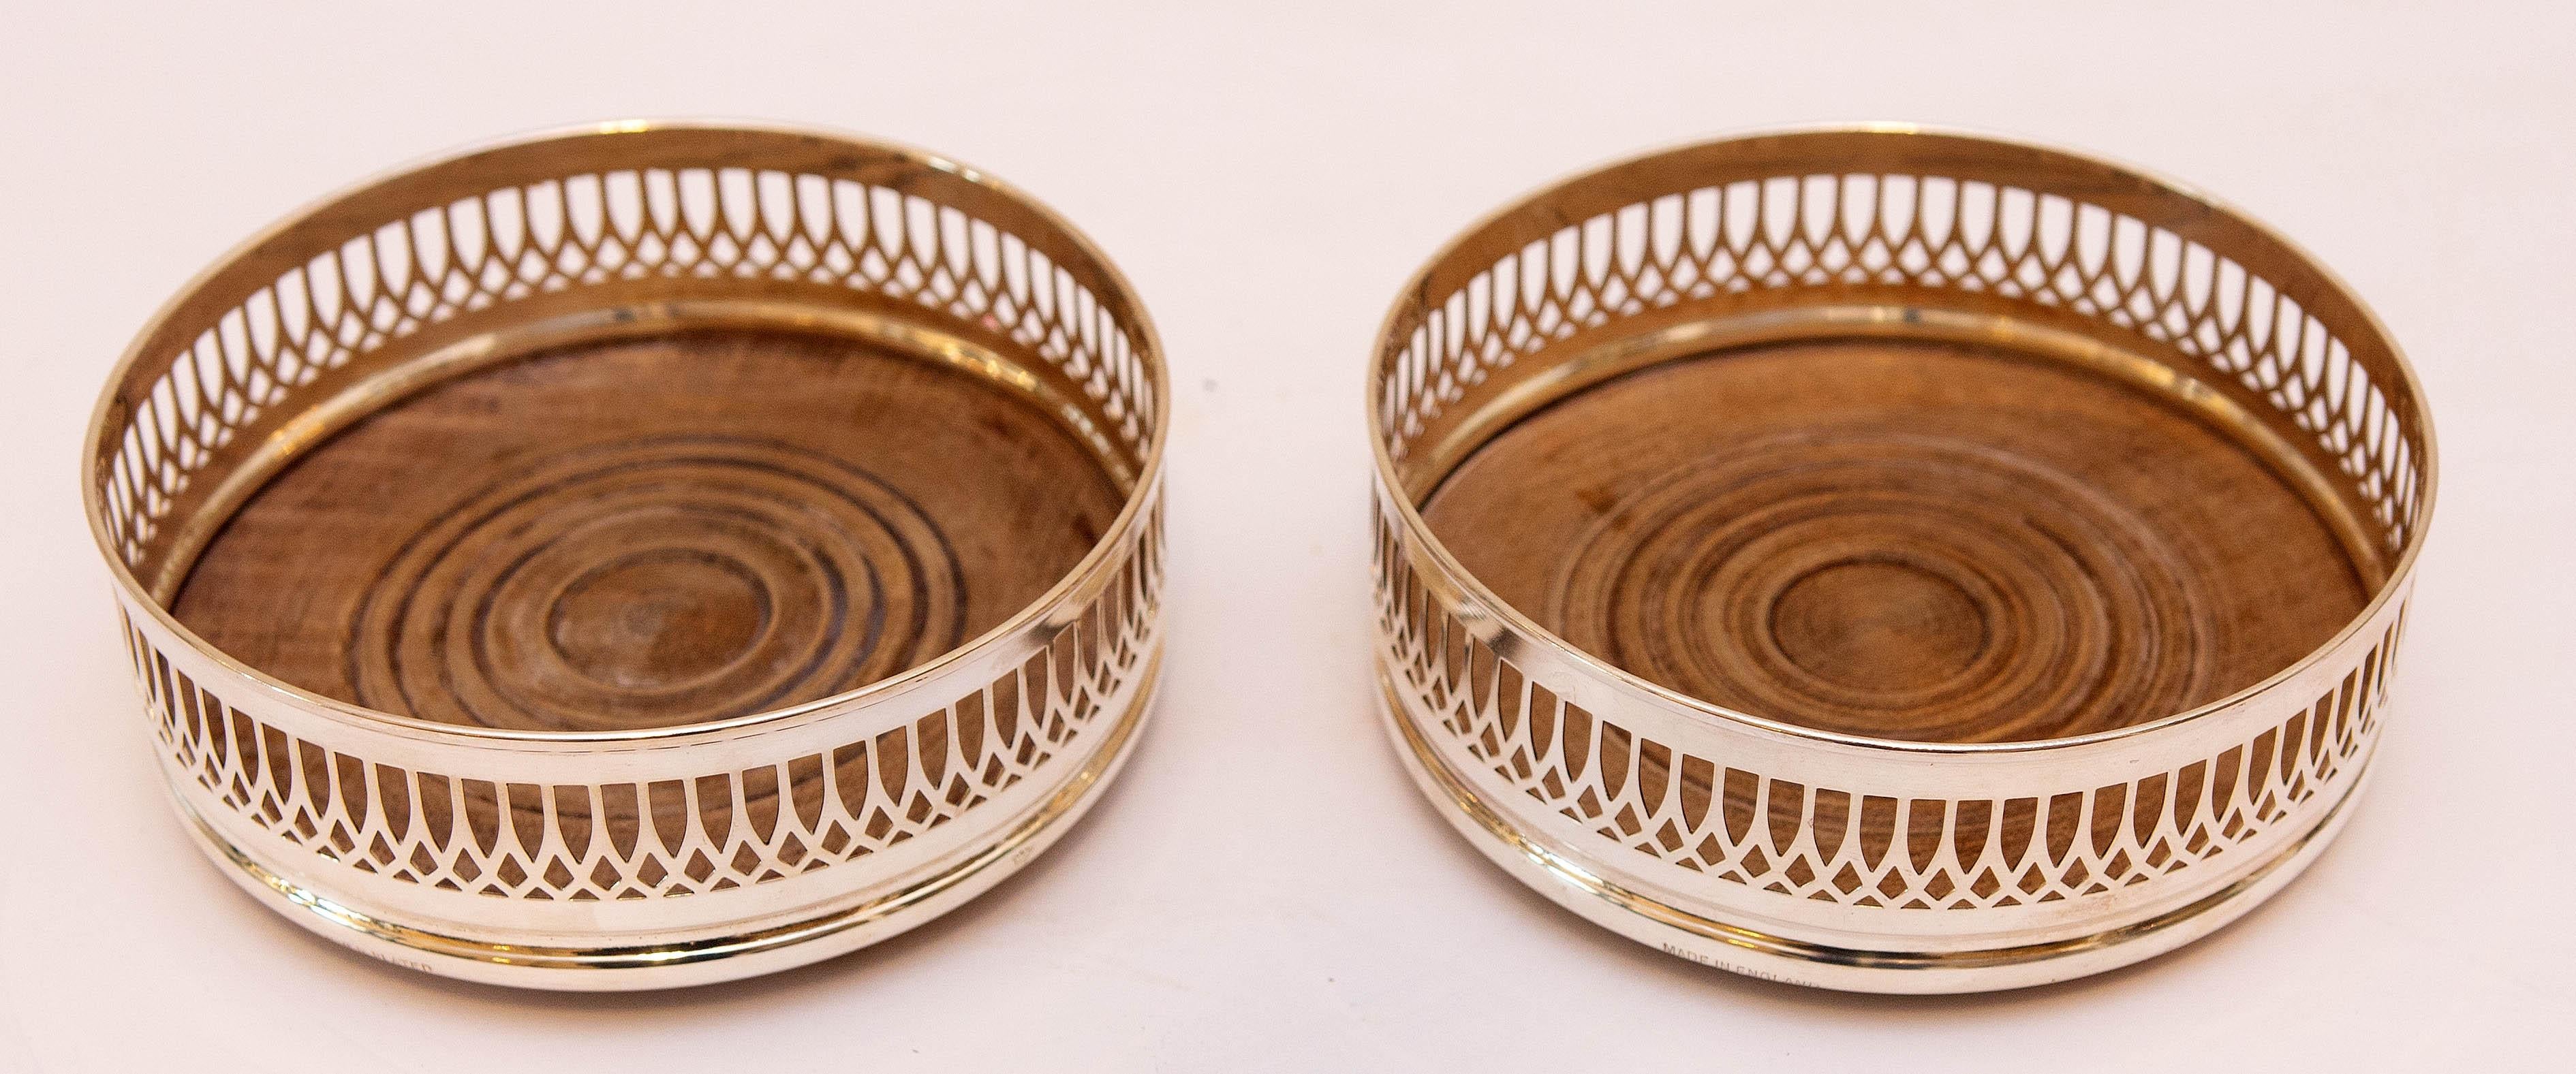 Pair of antique English silver plate wine coasters. Wood bottoms, early 20th century.